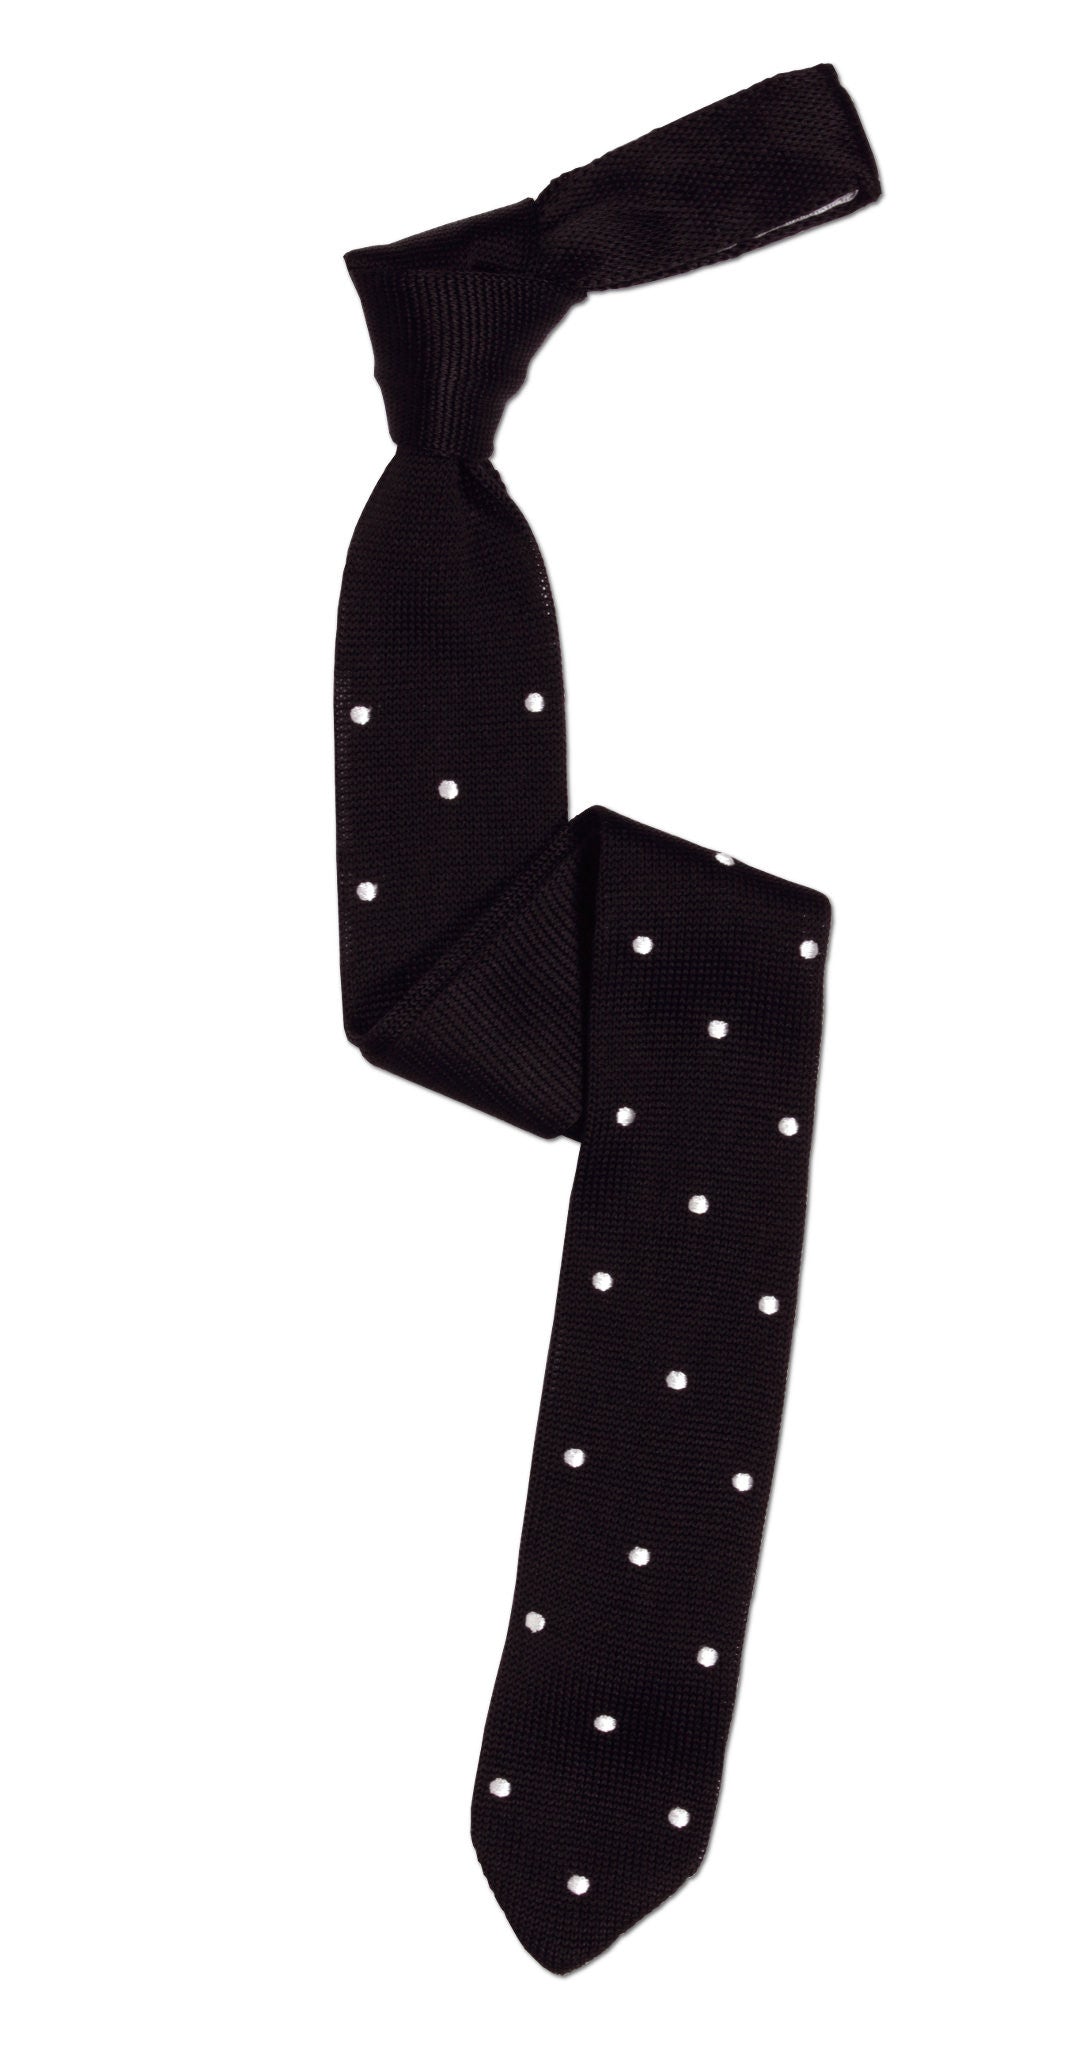 Black knitted tie with white pin dots